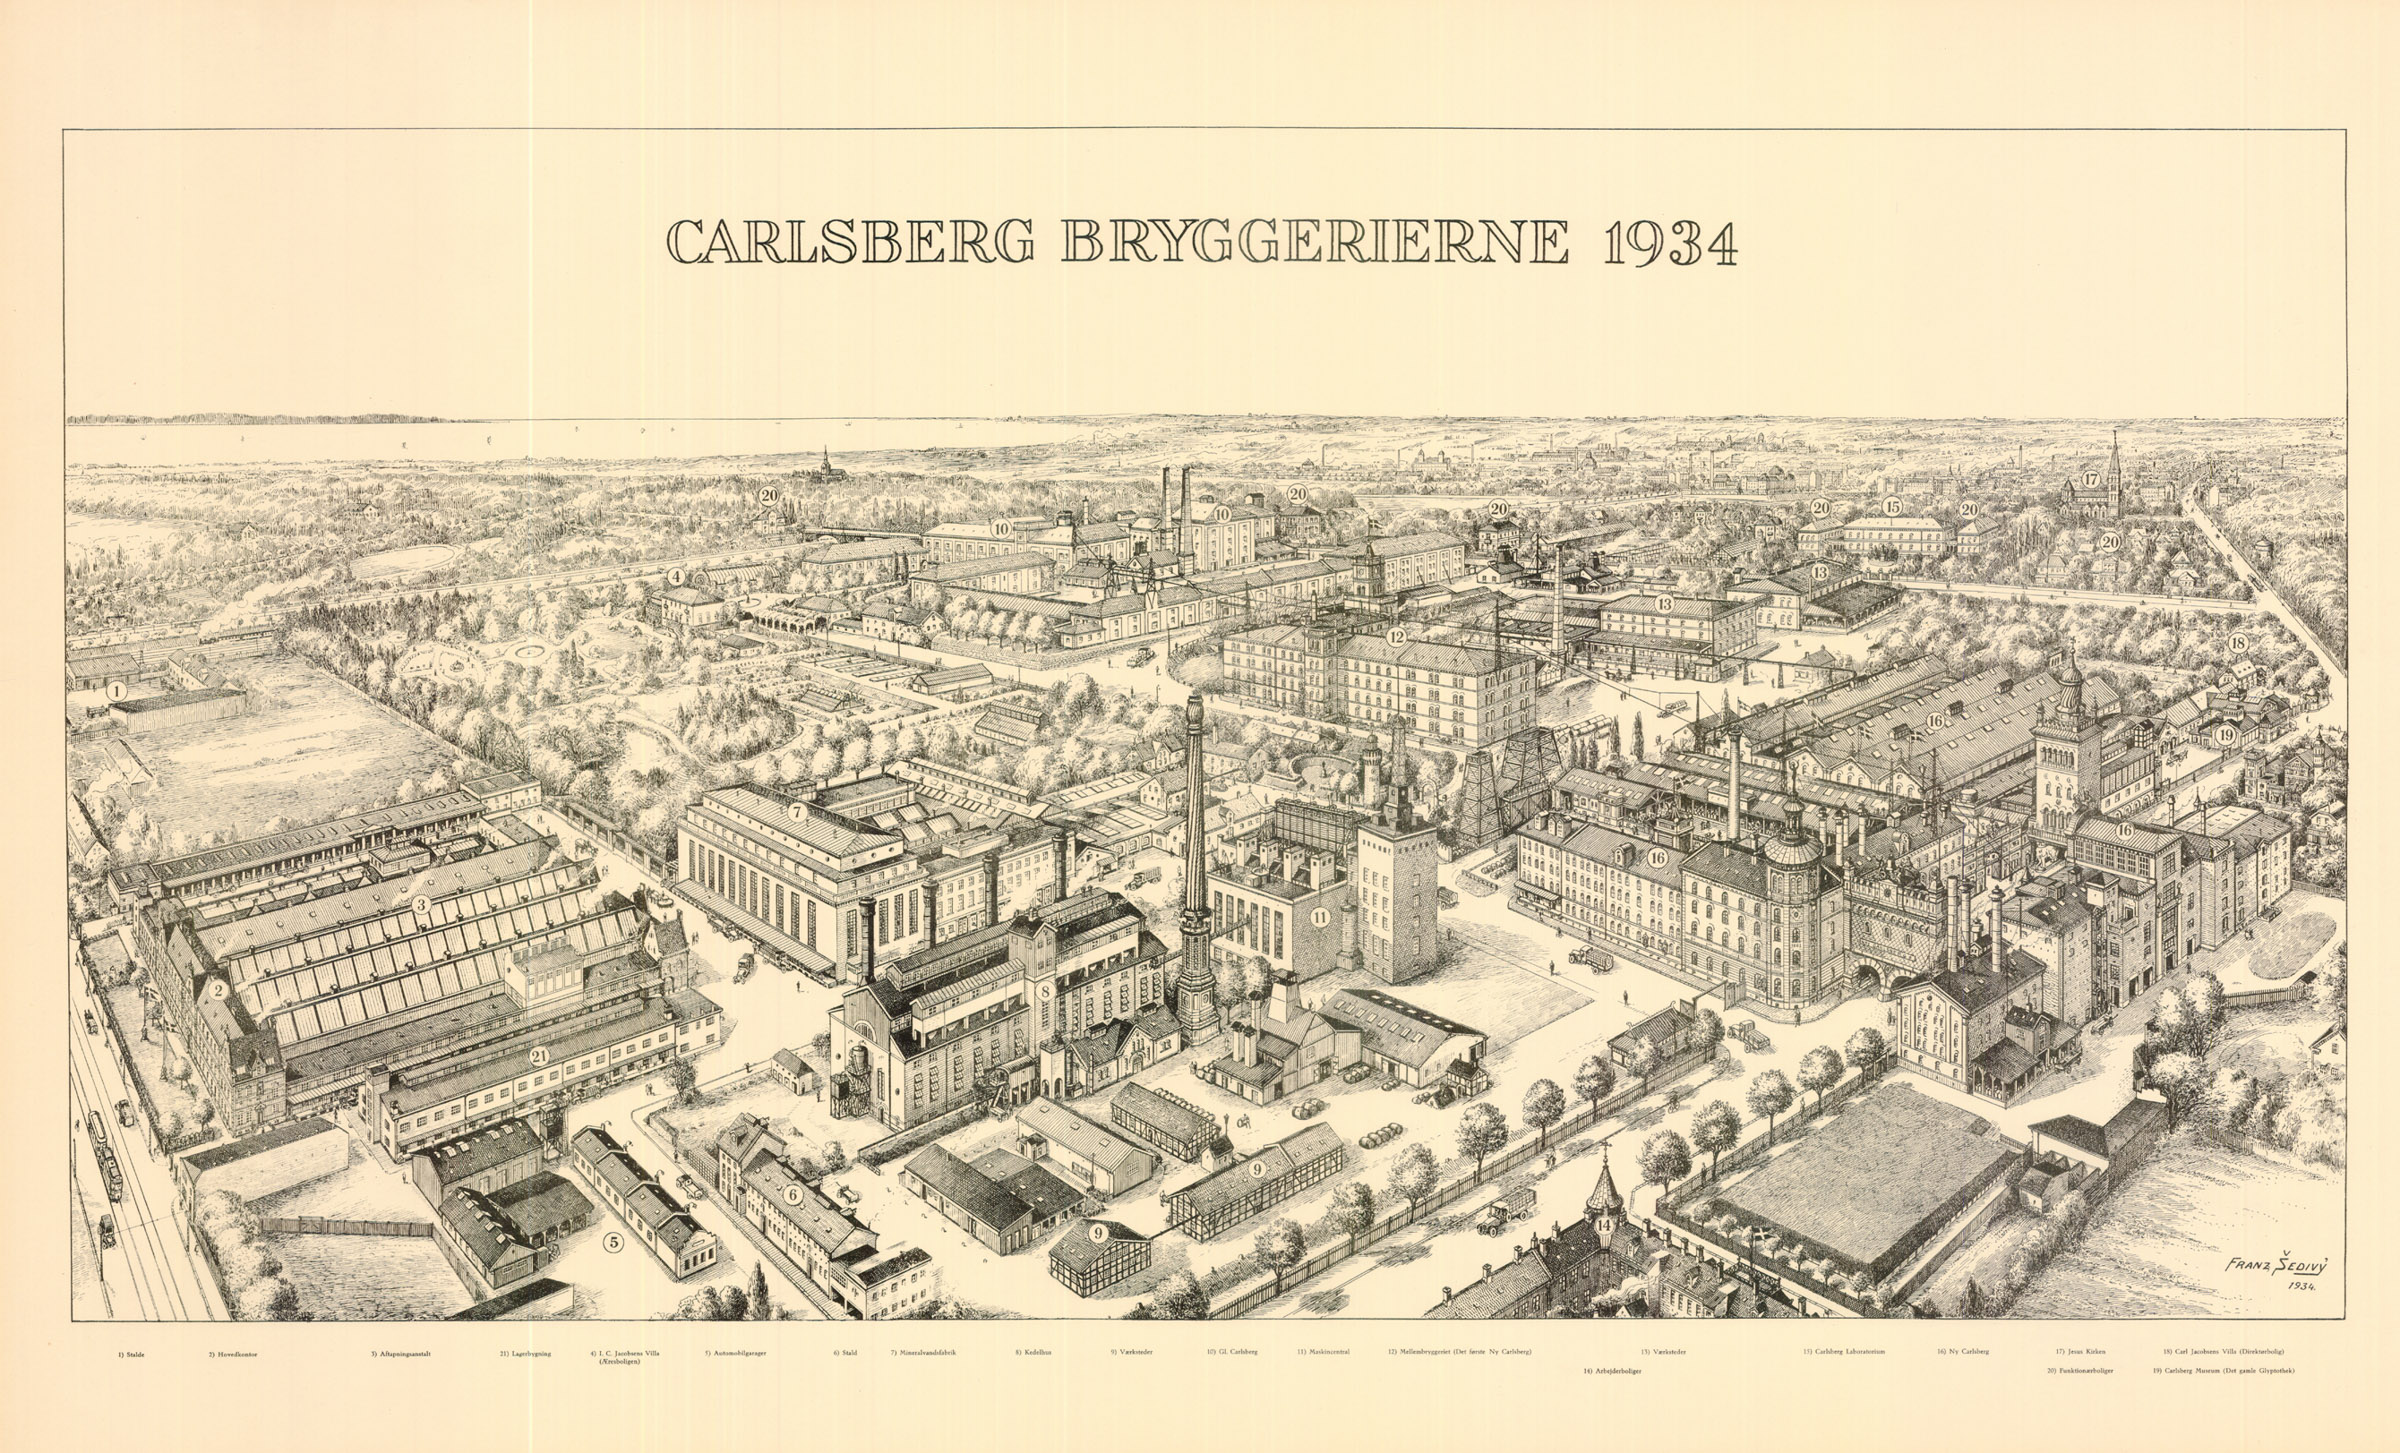 Life, love, science, and art – how the Carlsberg City goes well beyond a brewery